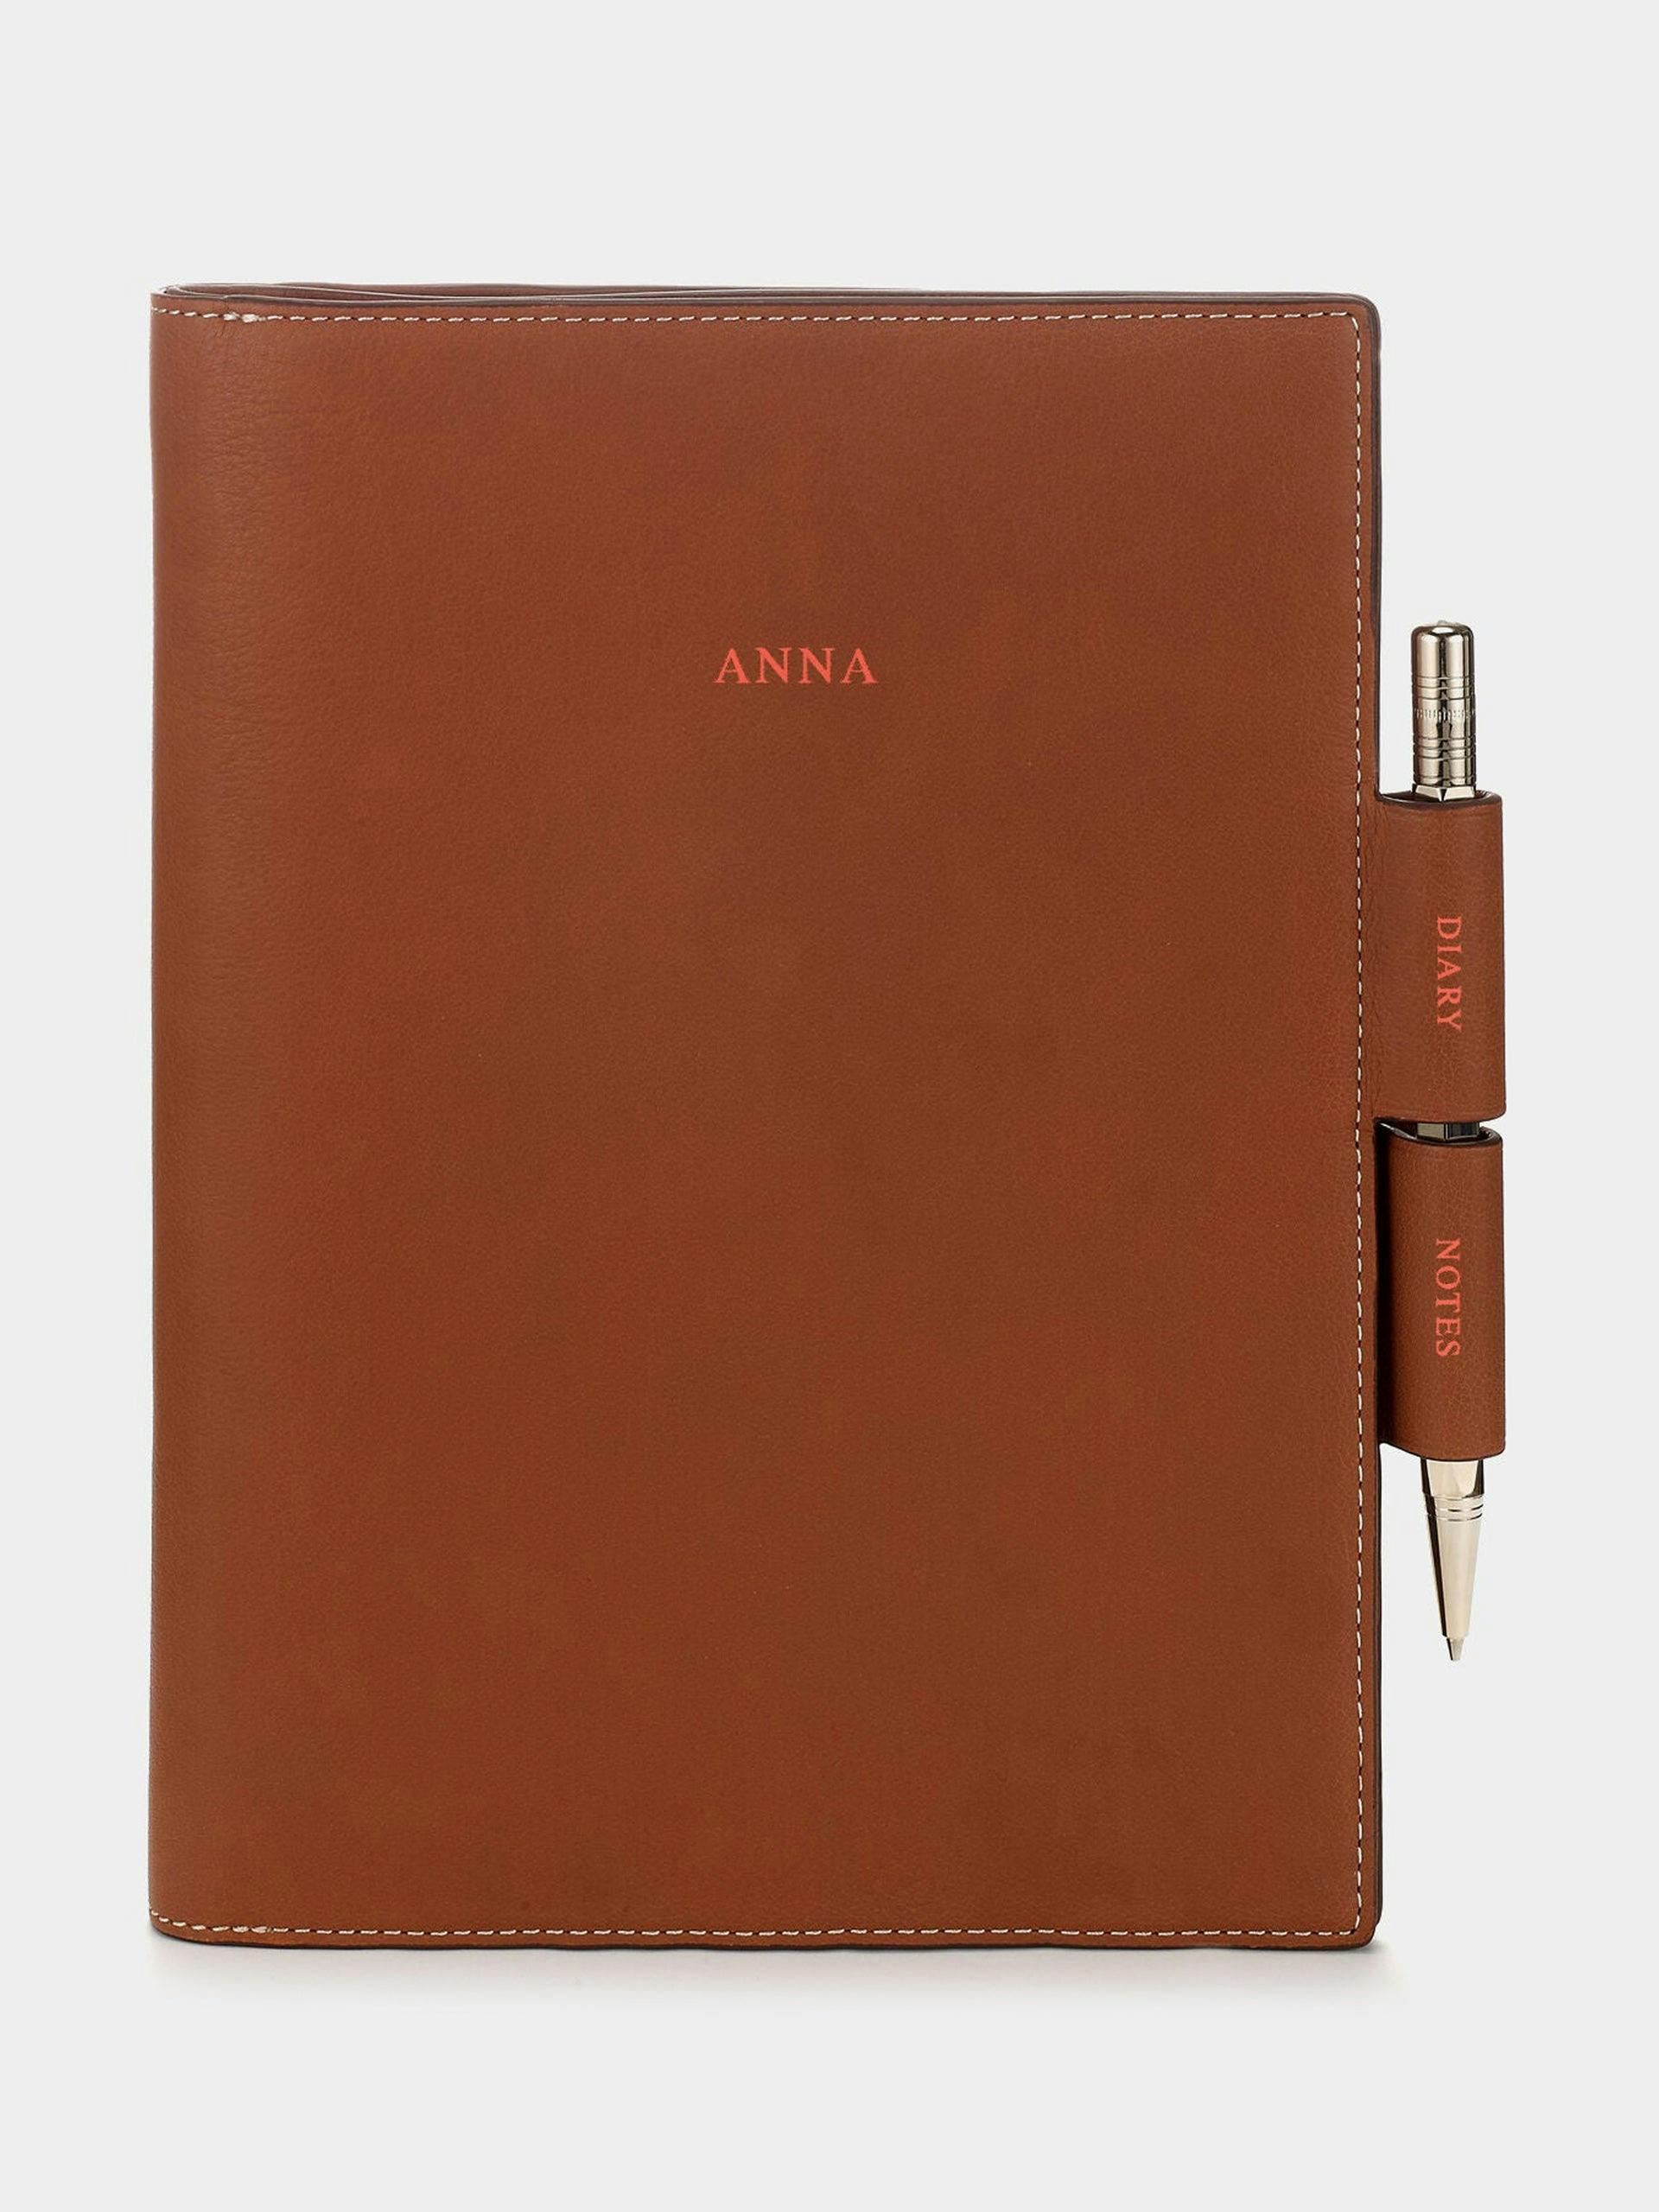 Personalised leather two way journal